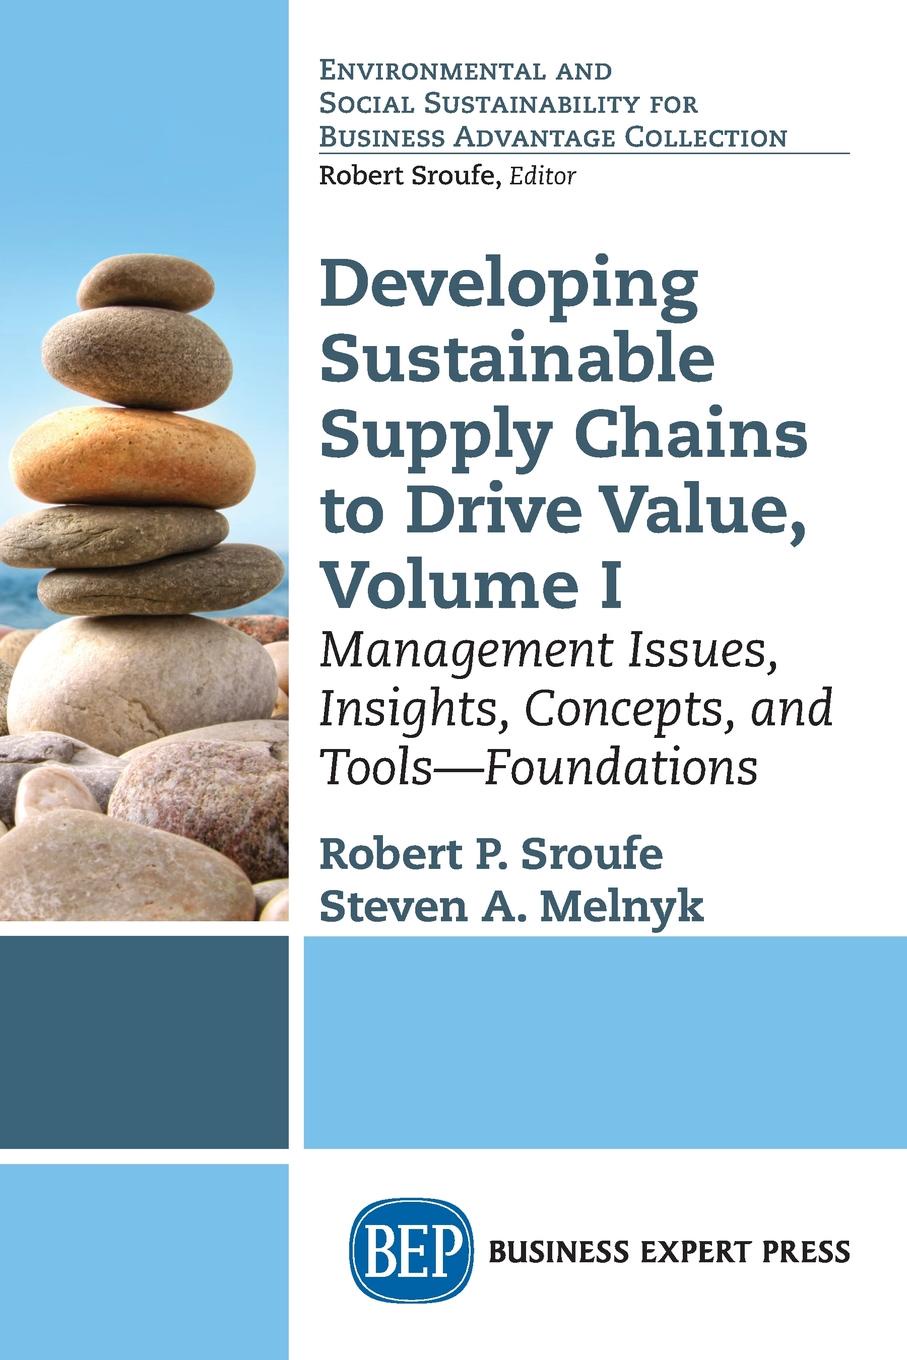 Developing Sustainable Supply Chains to Drive Value, Volume I. Management Issues, Insights, Concepts, and Tools-Foundations